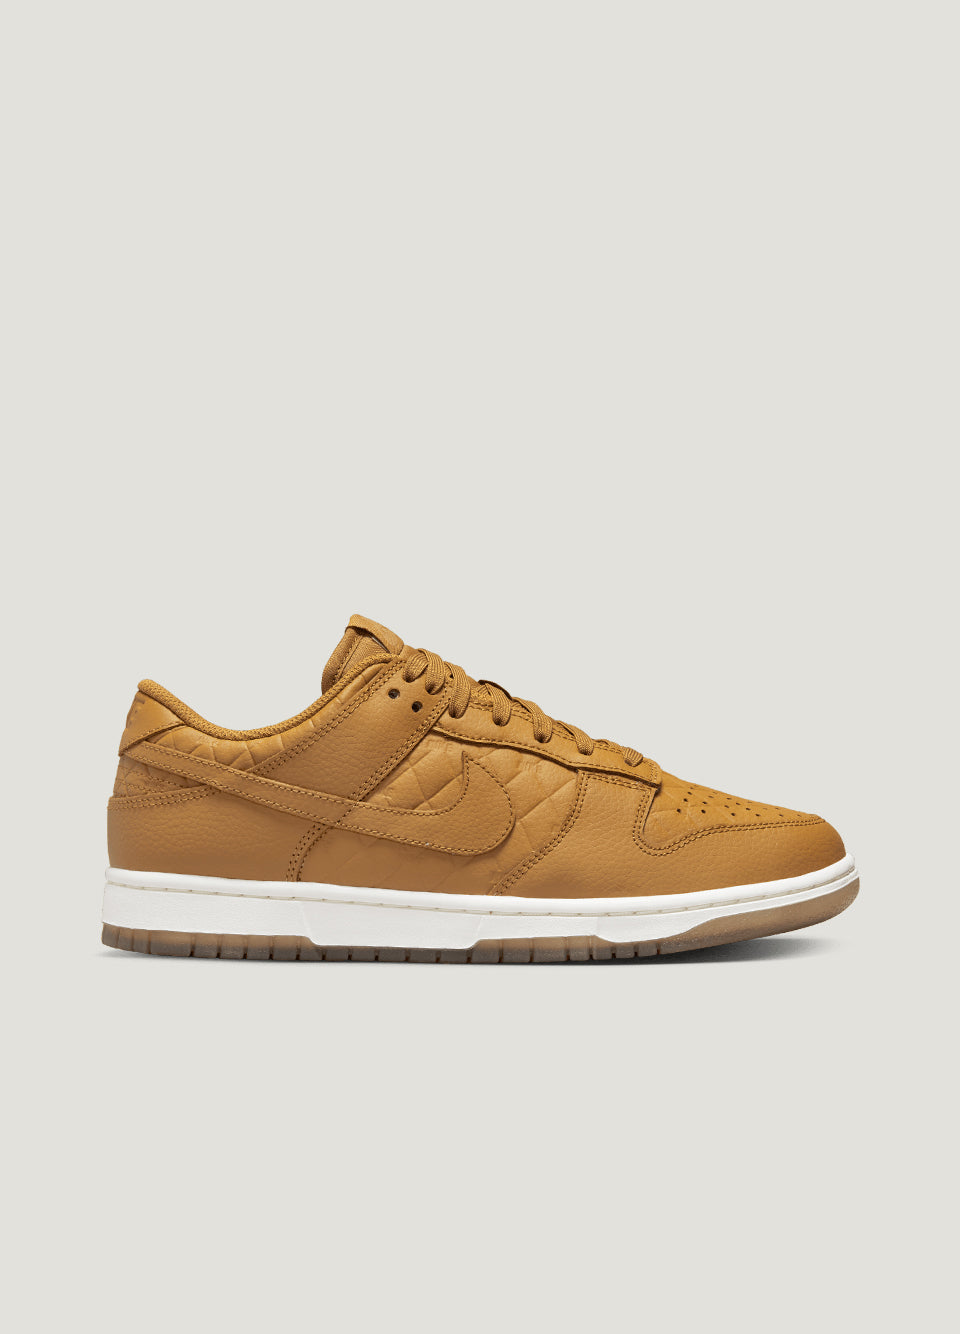 WOMEN'S NIKE DUNK LOW QUILTED WHEAT